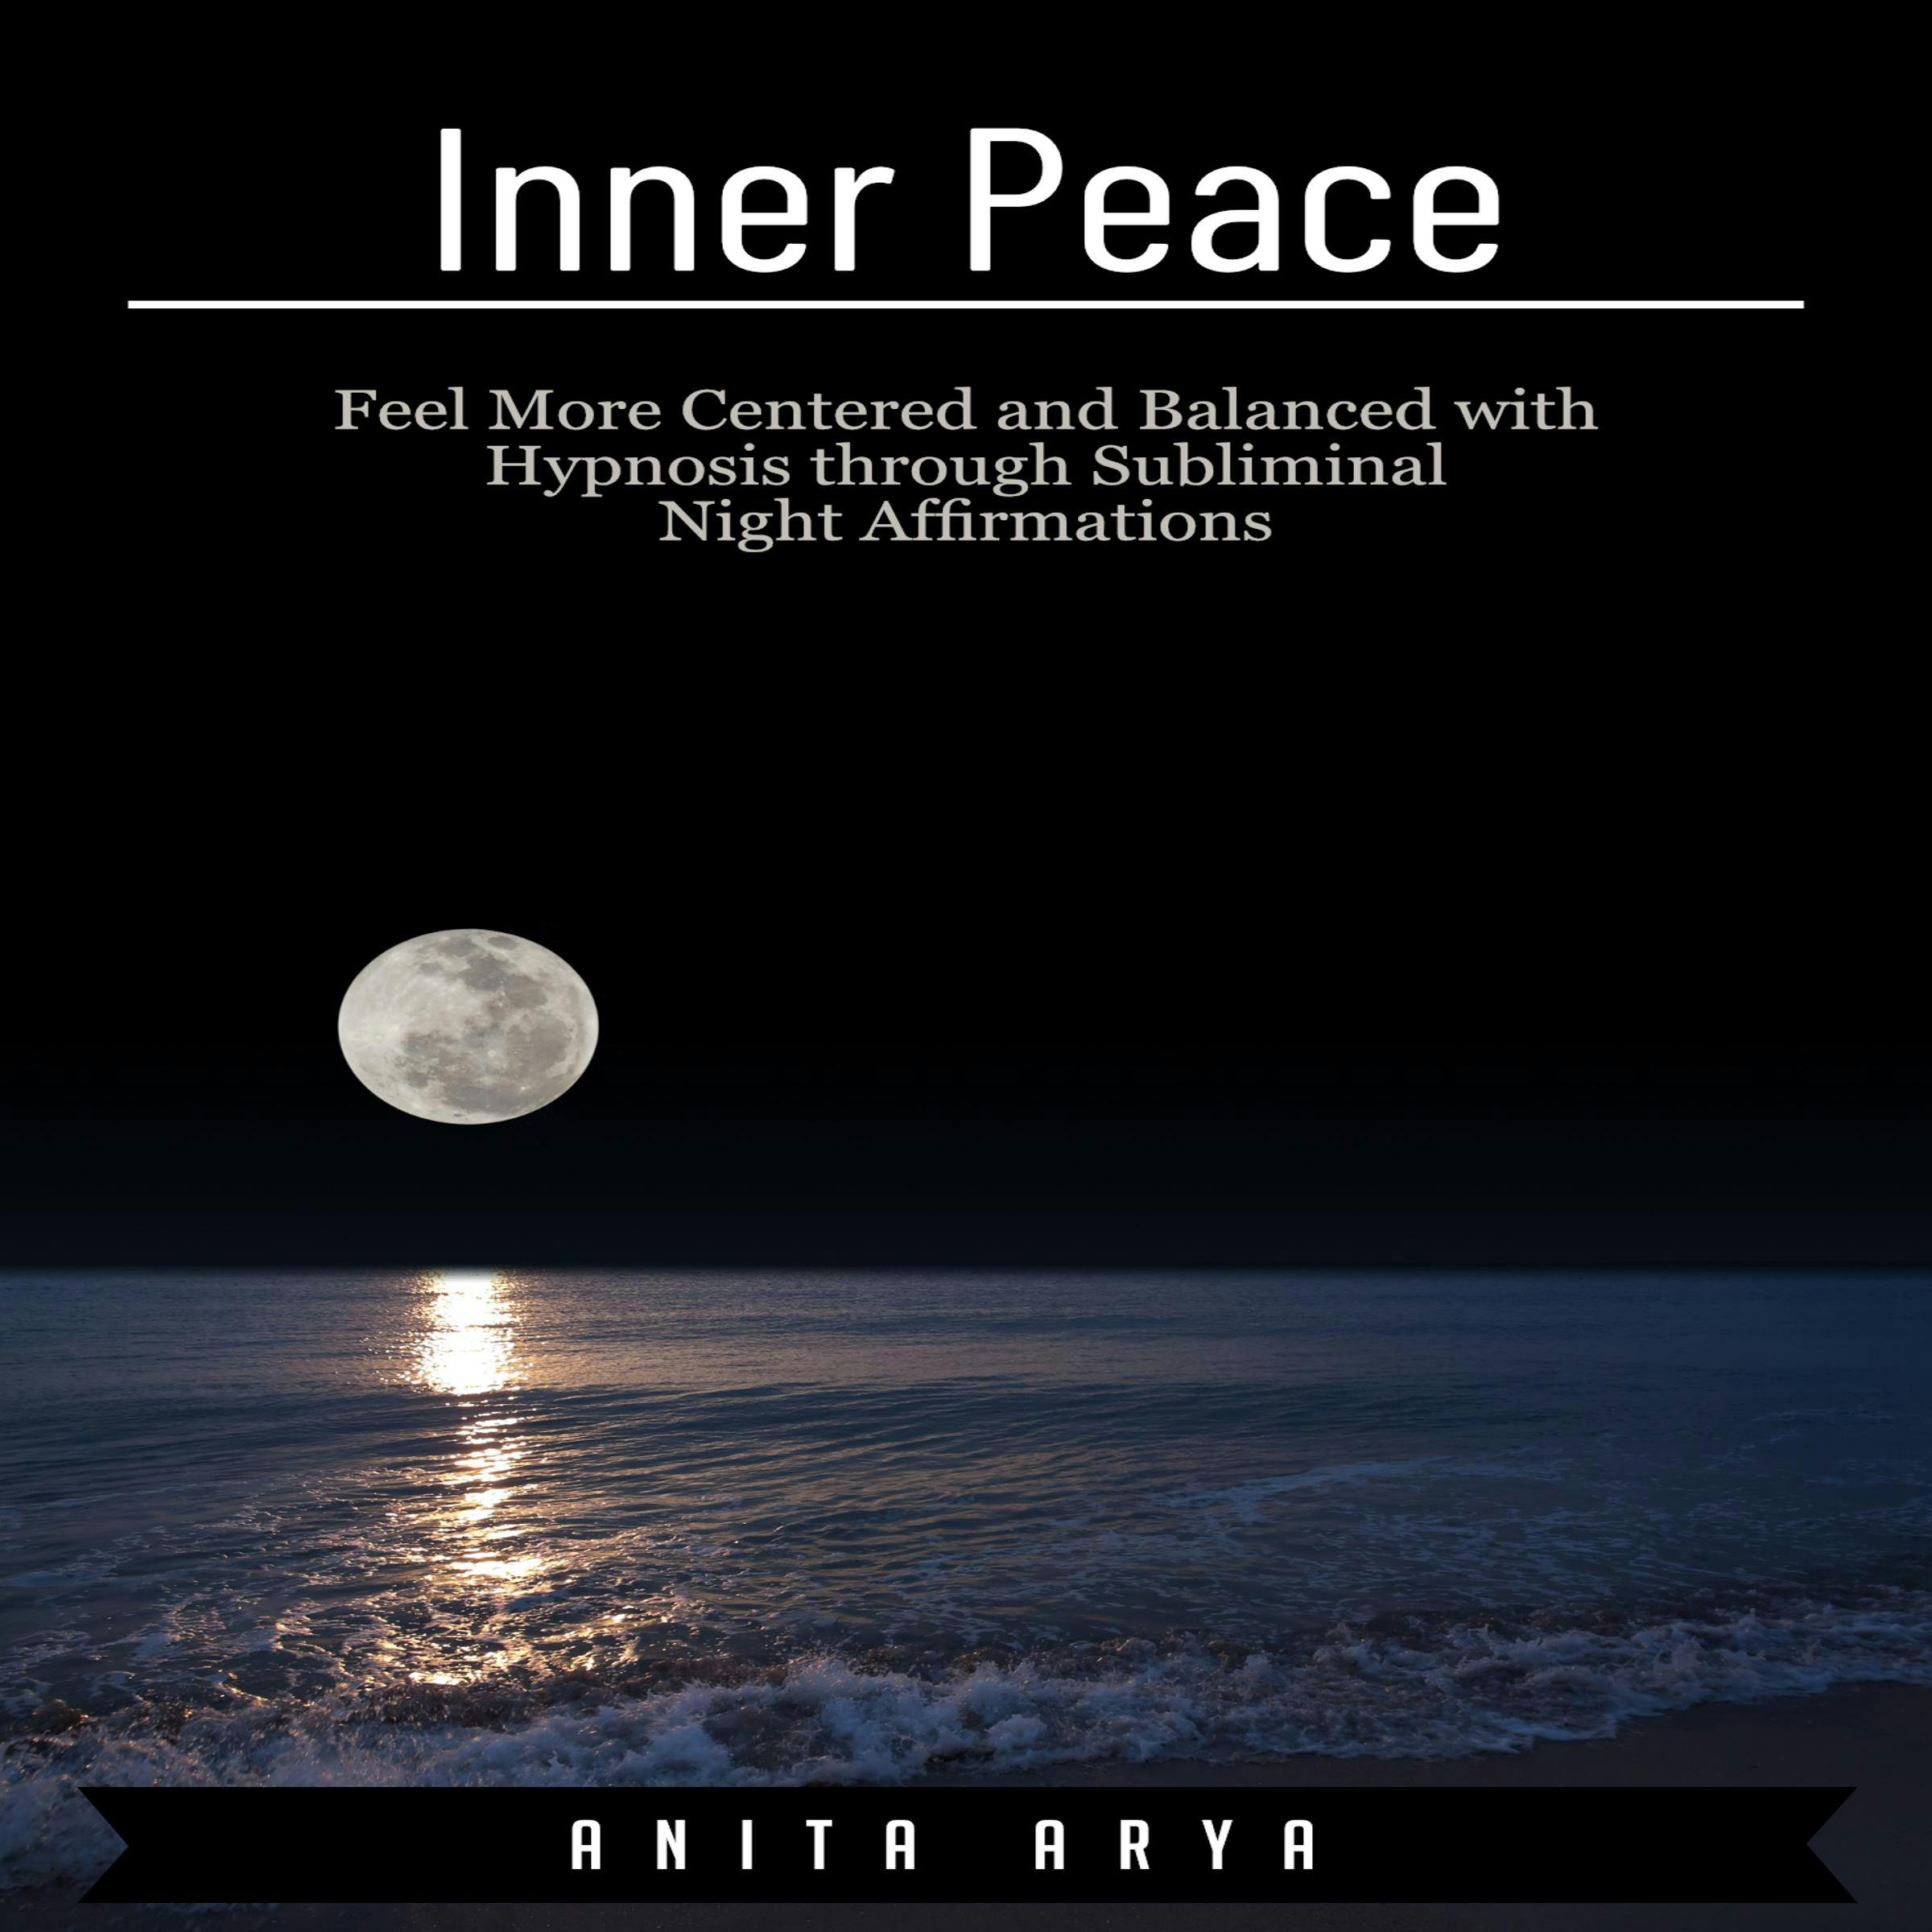 Inner Peace: Feel More Centered and Balanced with Hypnosis through Subliminal Night Affirmations - Anita Arya